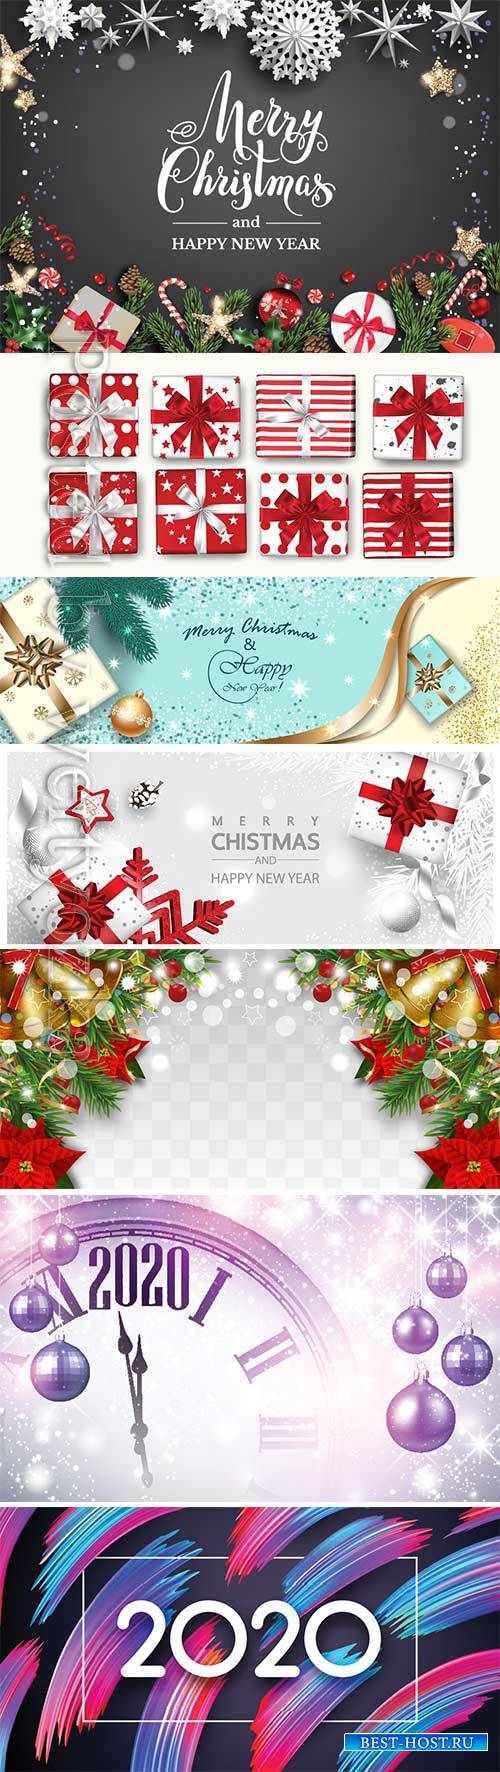 2020 Merry Chistmas and Happy New Year vector illustration # 14